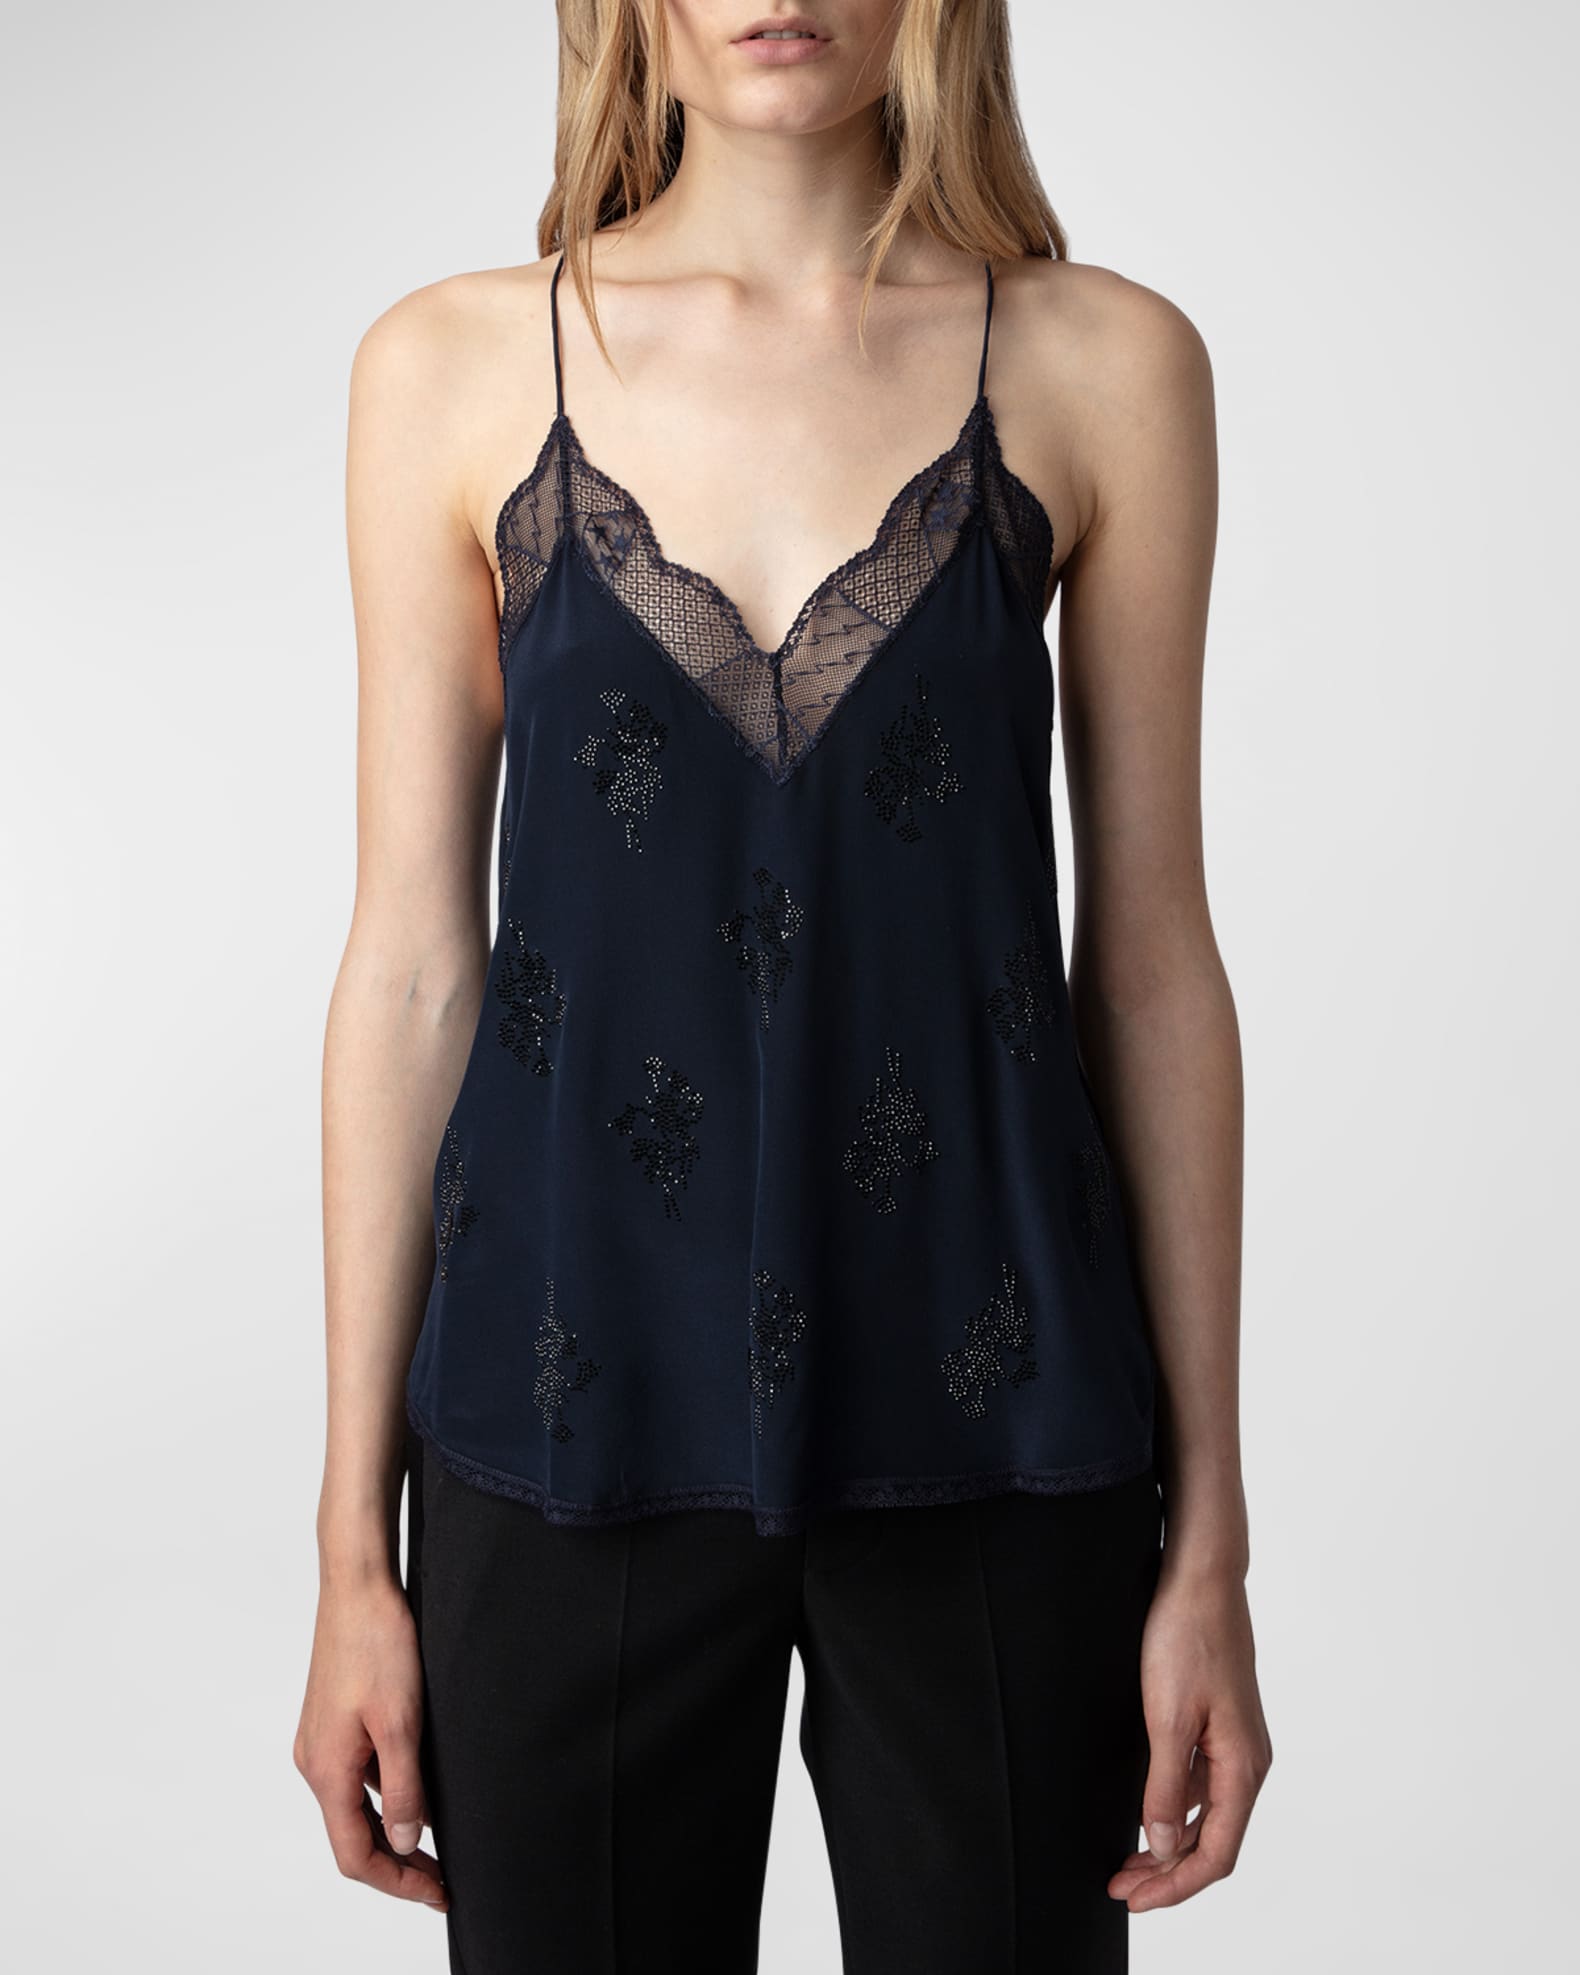 Zadig & Voltaire Christy Camisole